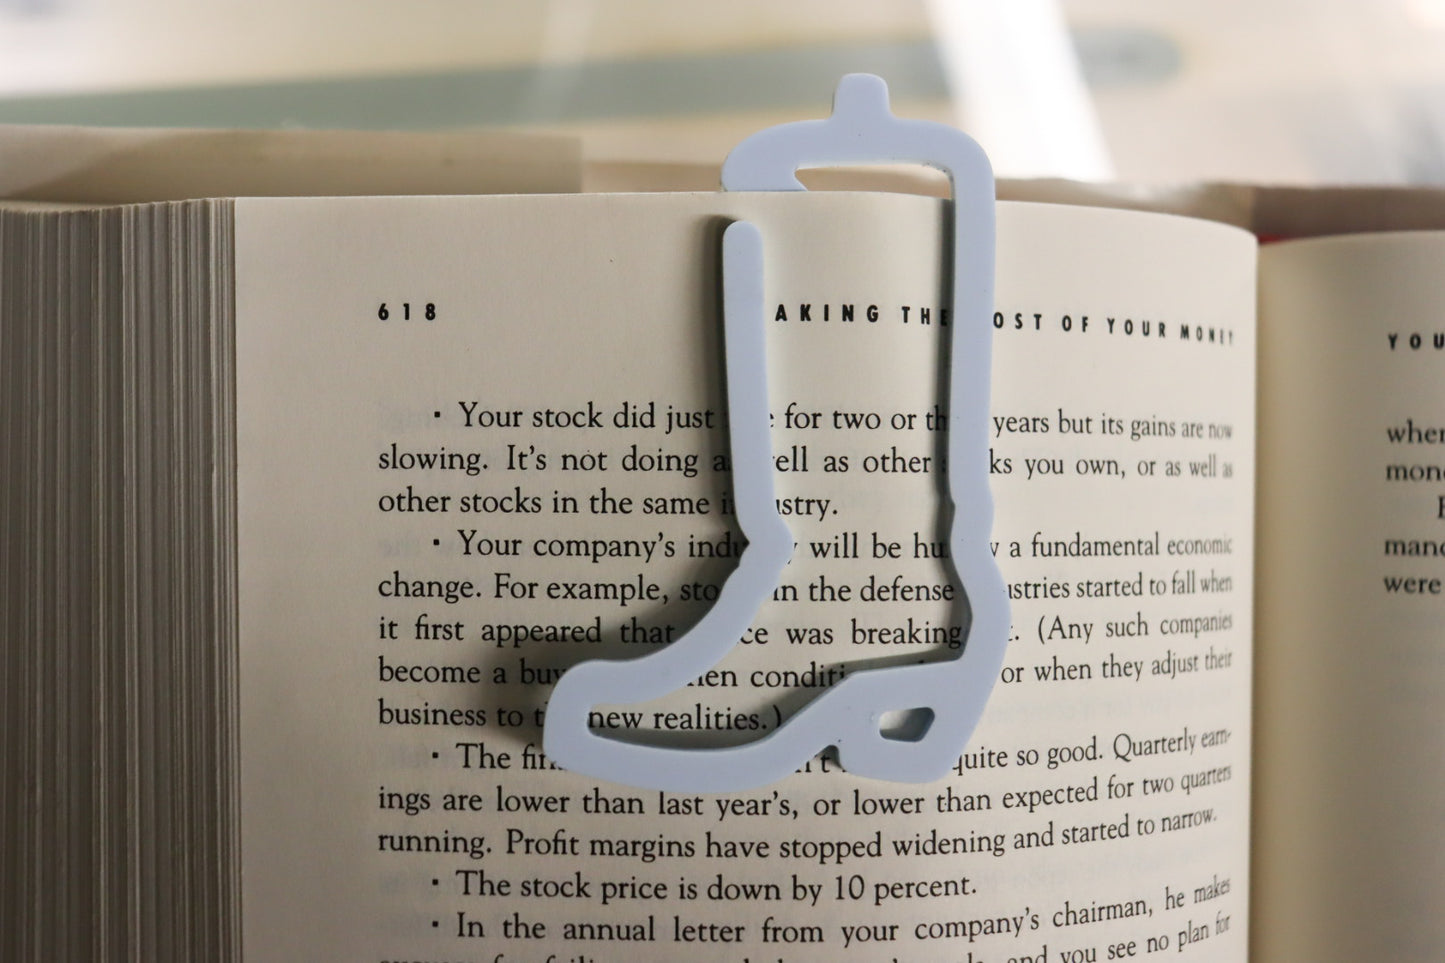 Cowgirl boot acrylic bookmark, paper clip, bag clip